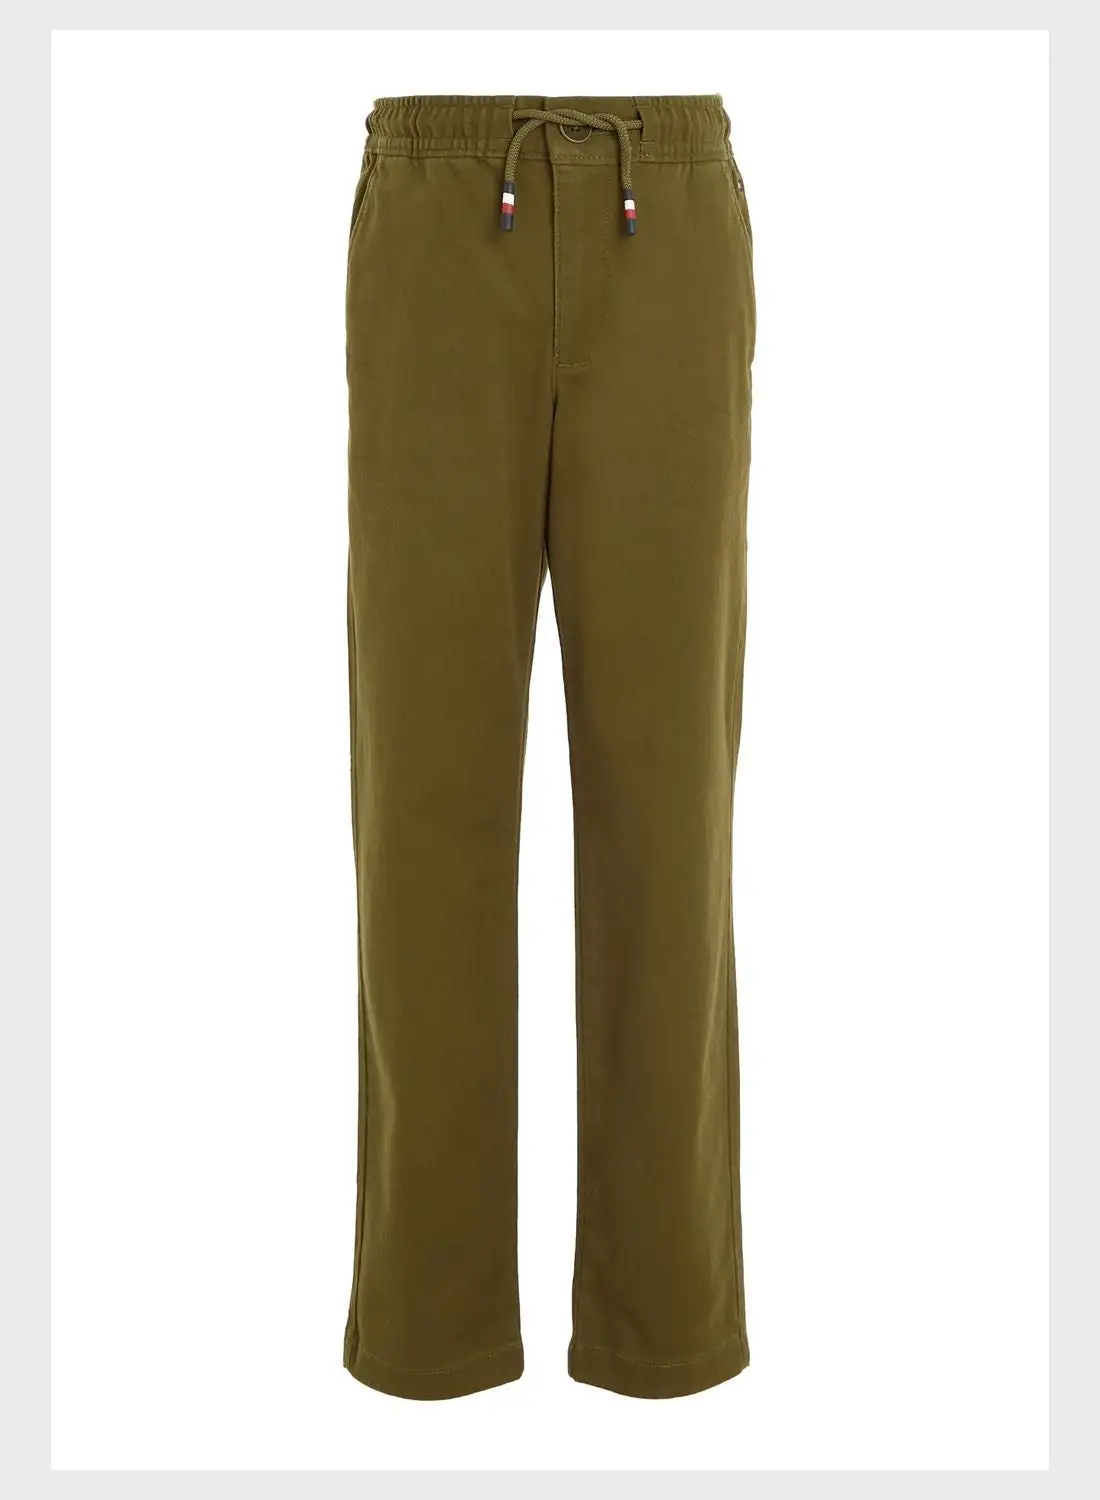 TOMMY HILFIGER Youth Slim Fit Chinos